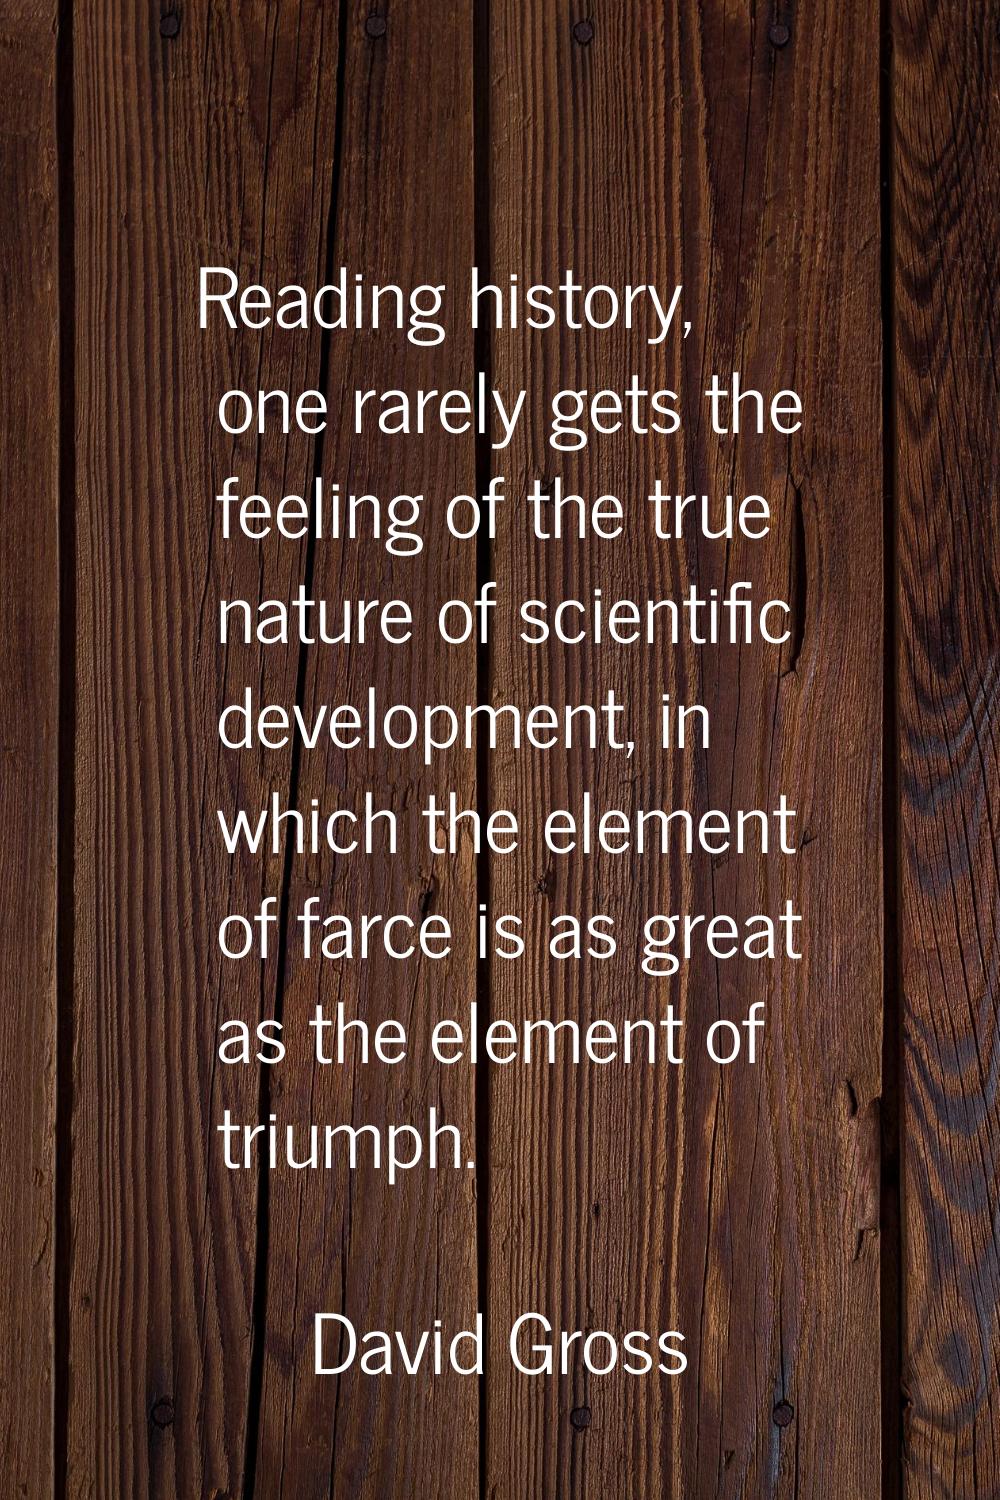 Reading history, one rarely gets the feeling of the true nature of scientific development, in which